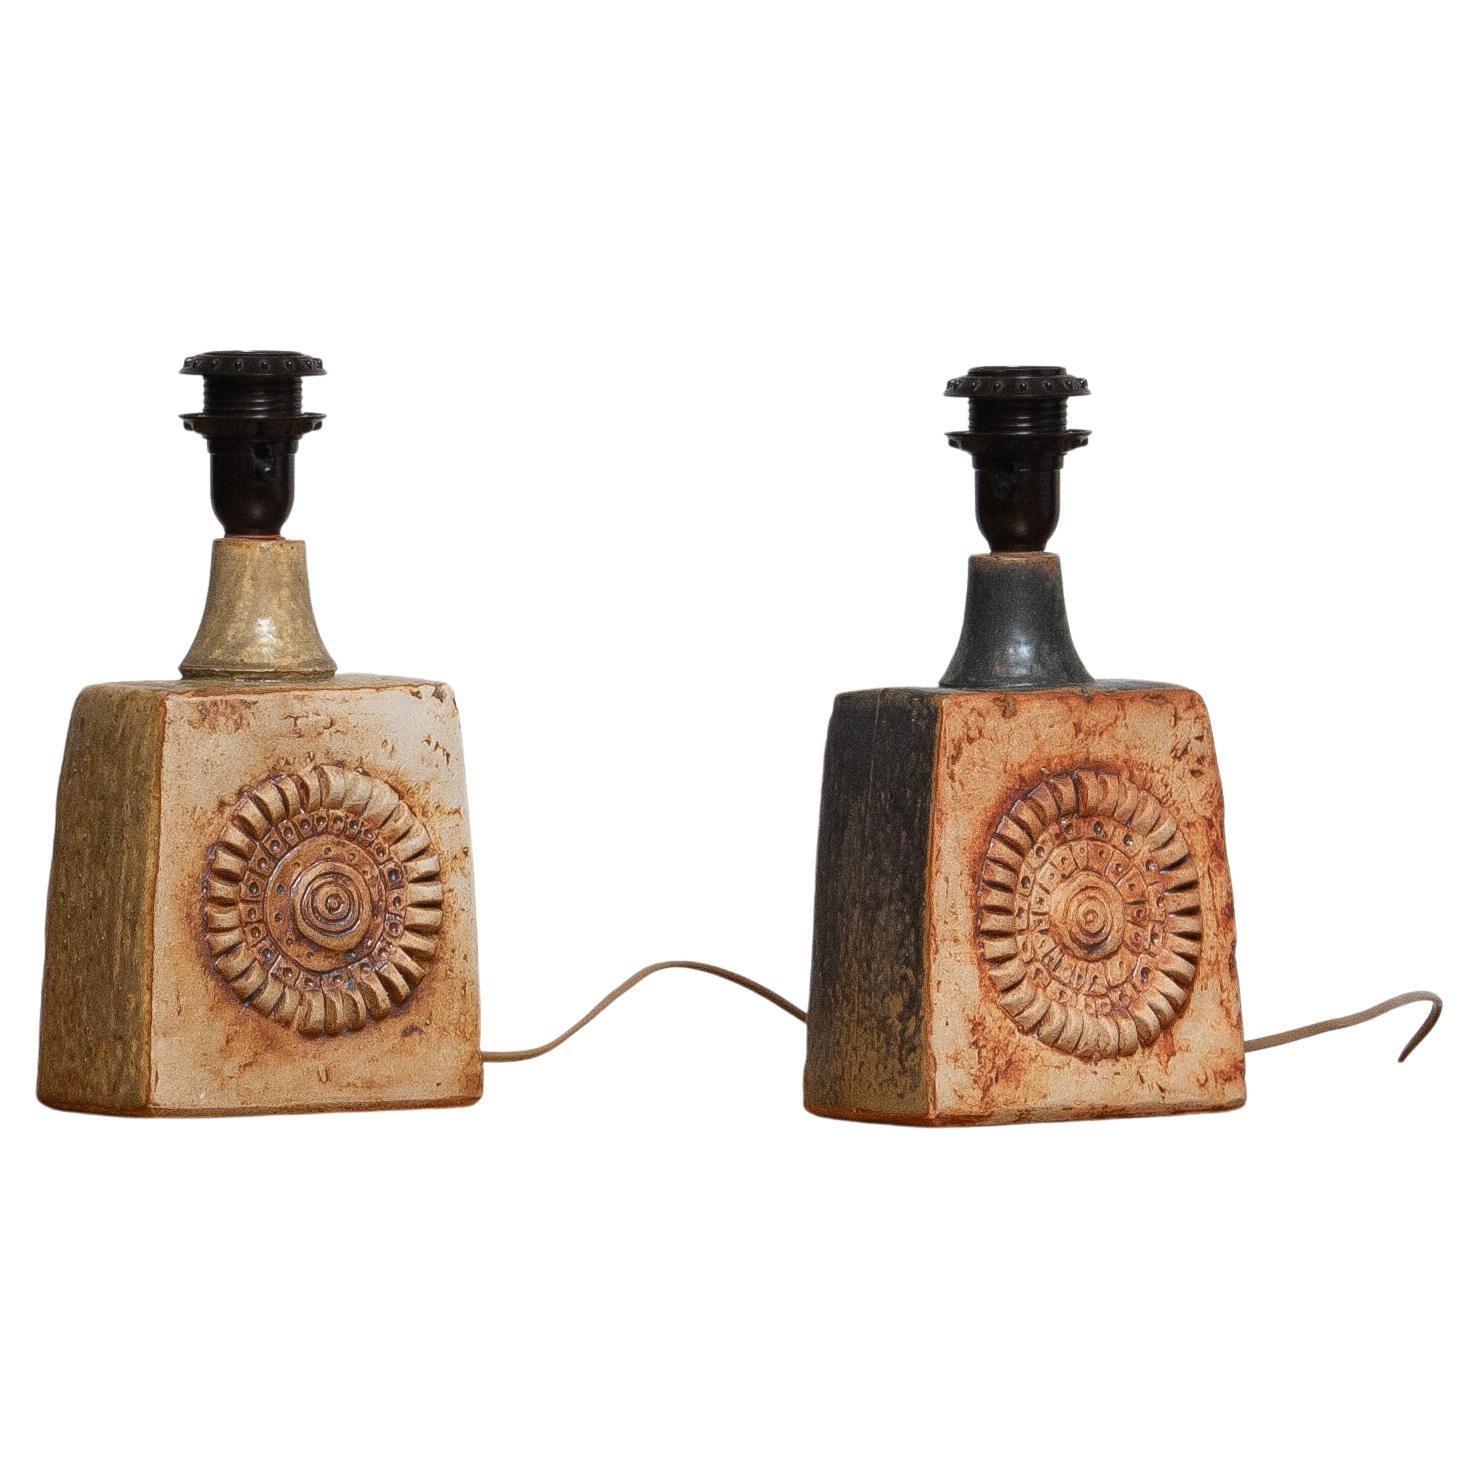 1960s, Two Brutalist Terracotta Pottery Table Lamps by Bernard Rooke, England